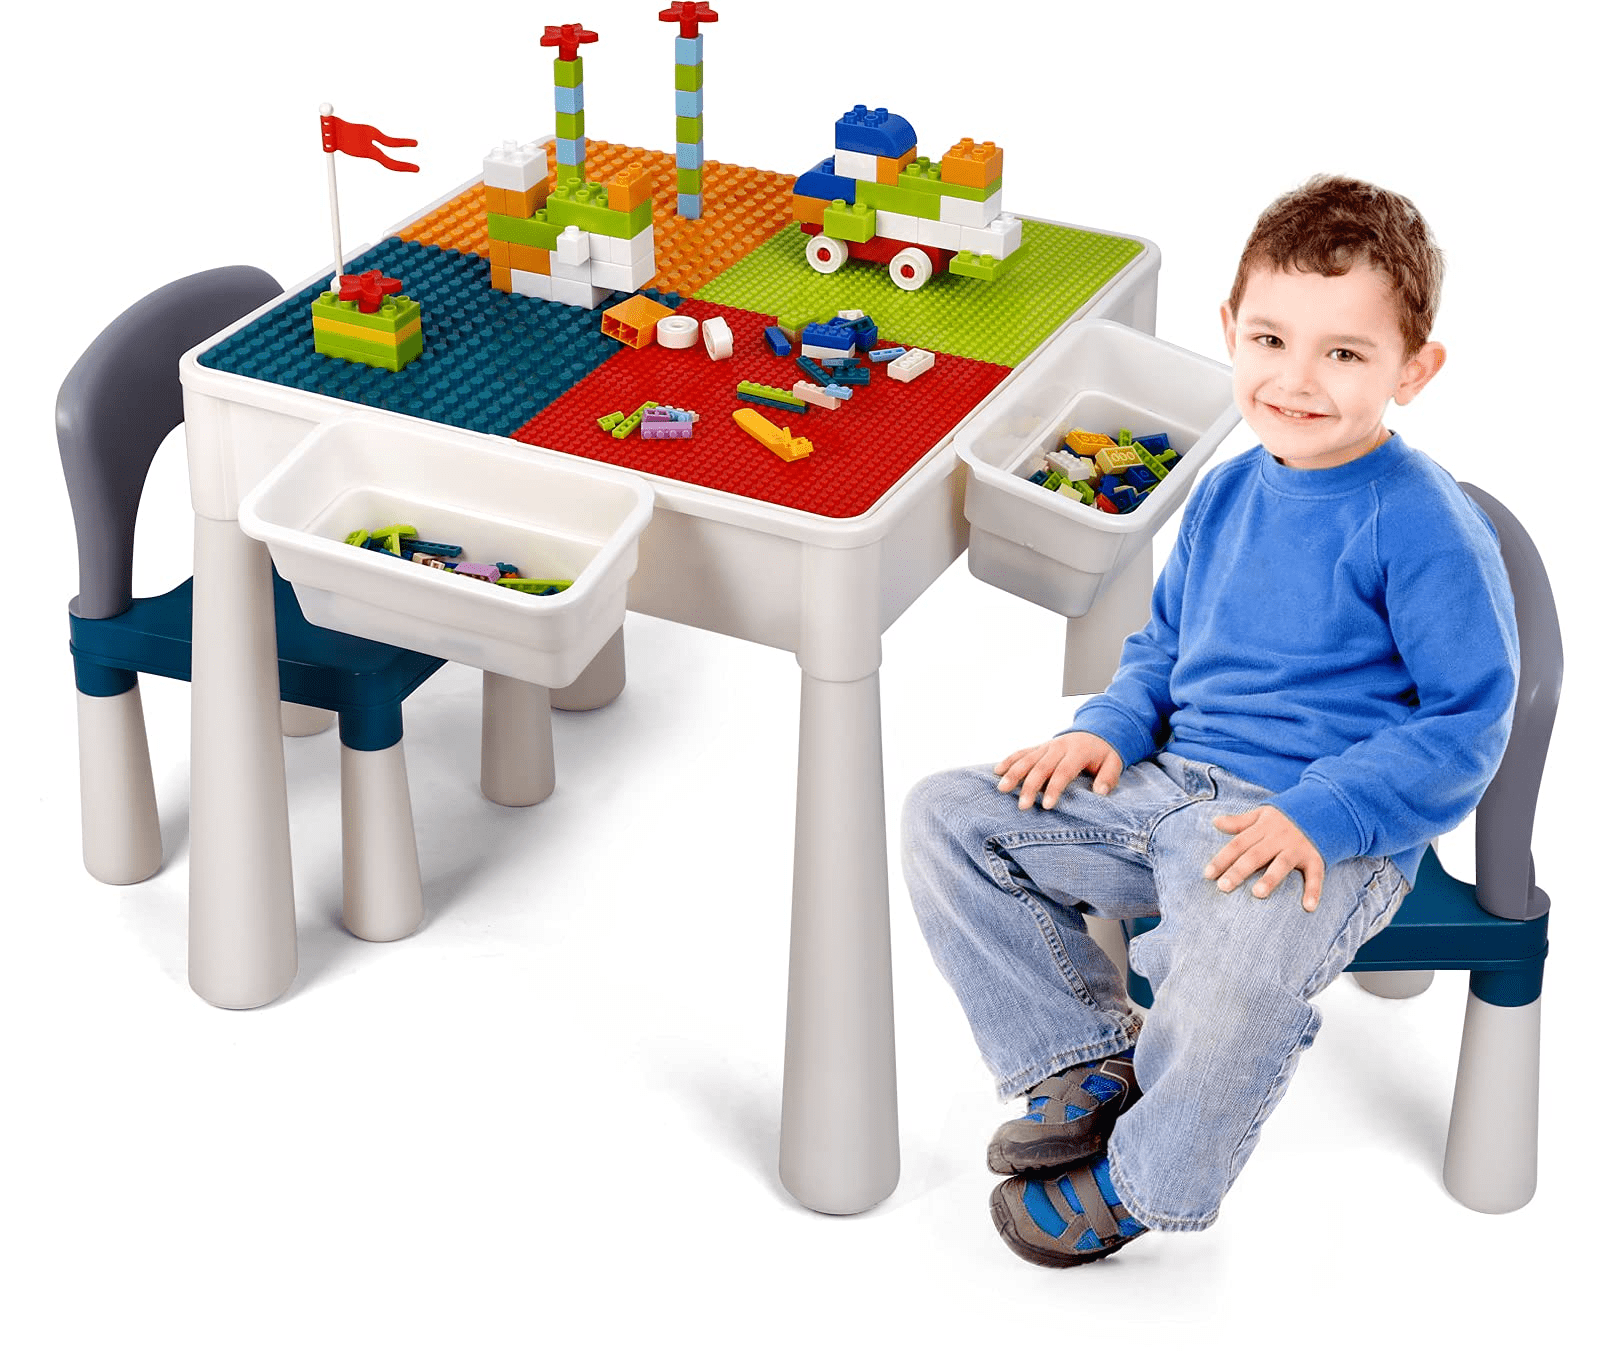 Paw Patrol Table Chair Set Kids Toddler Activity Wooden Play Room Gift New 